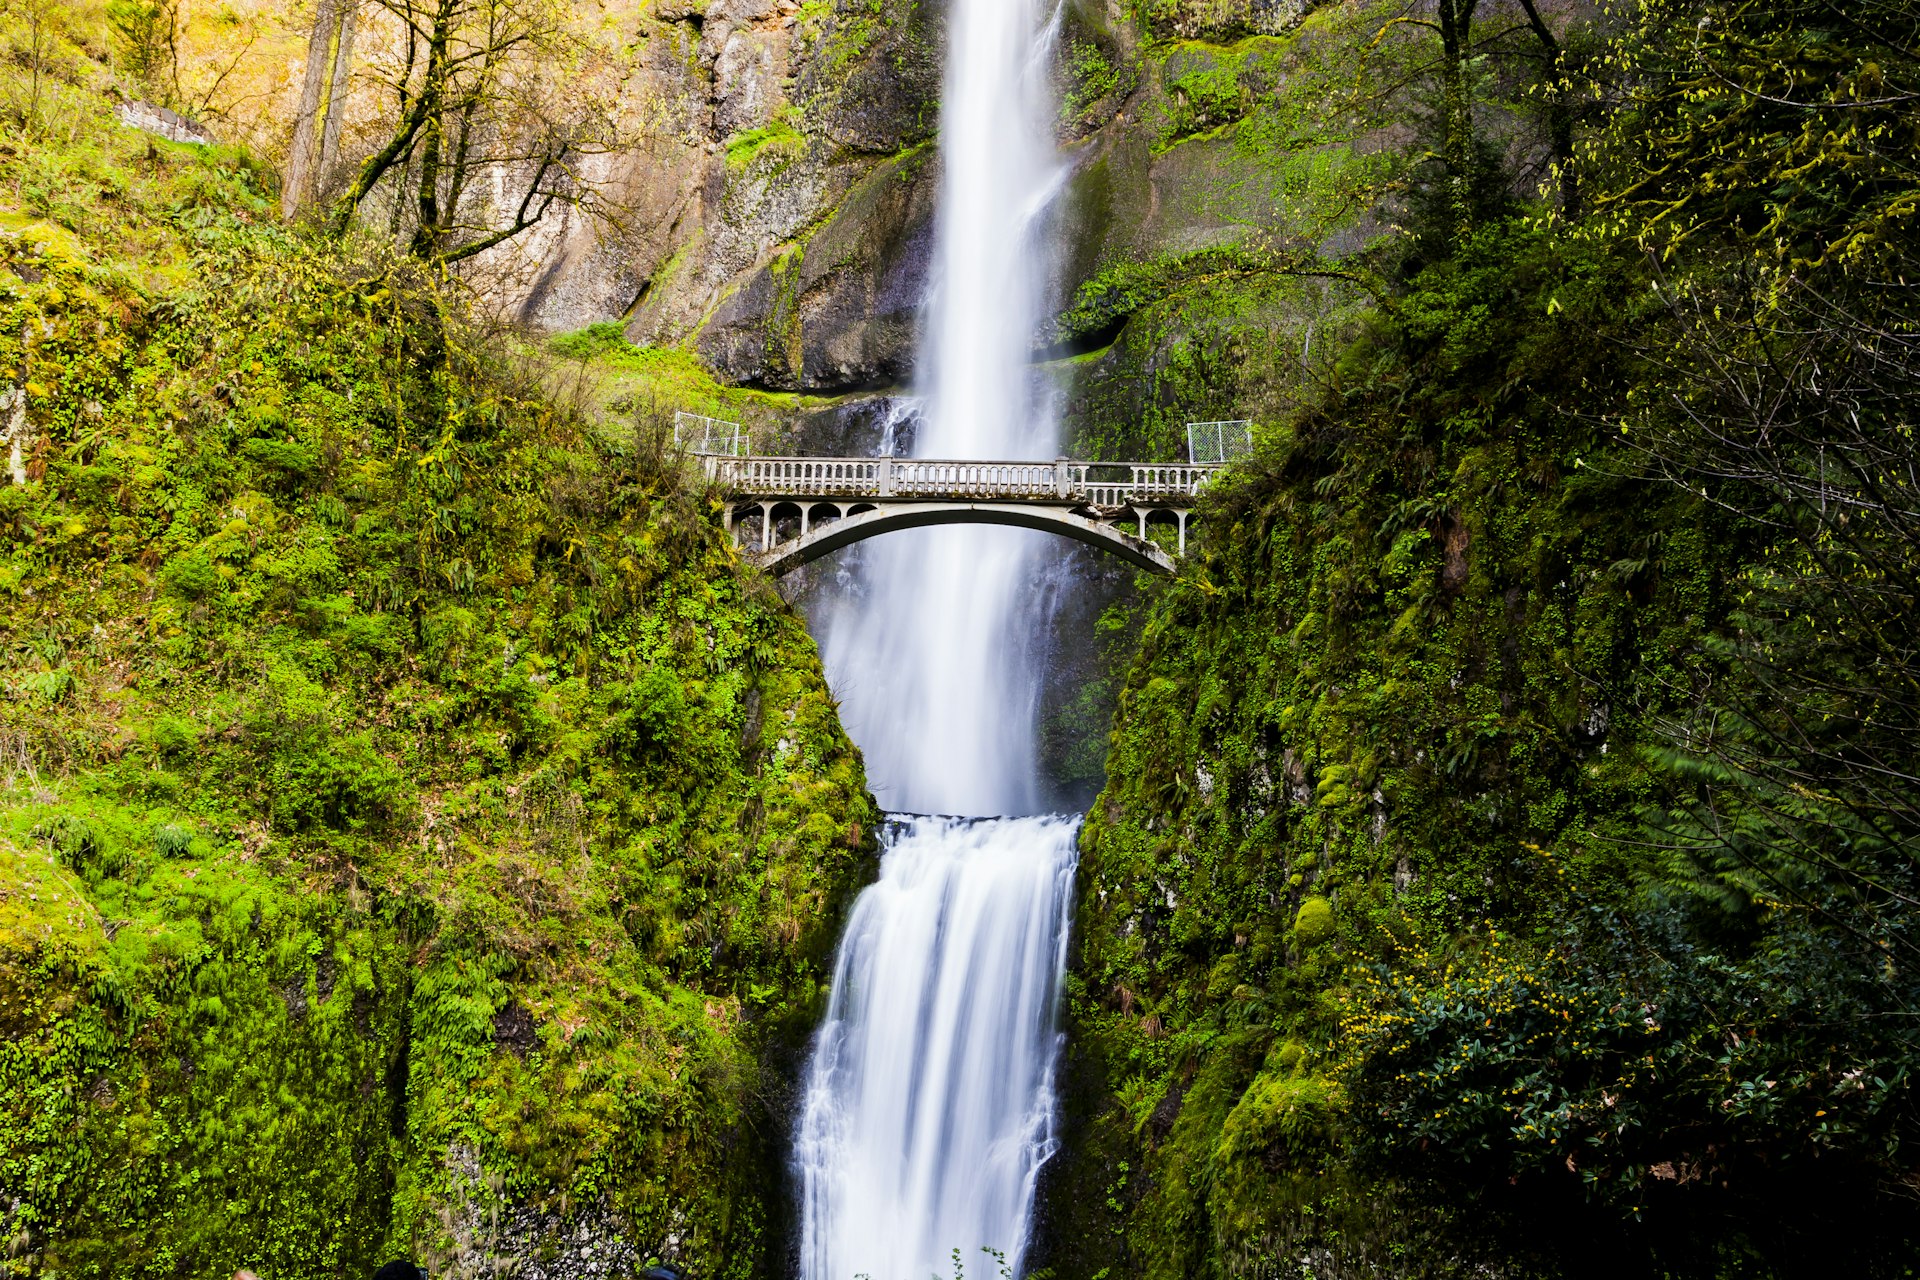 The iconic Multnomah Falls in the Columbia River Gorge is on many Portland visitors' must-see lists for a reason